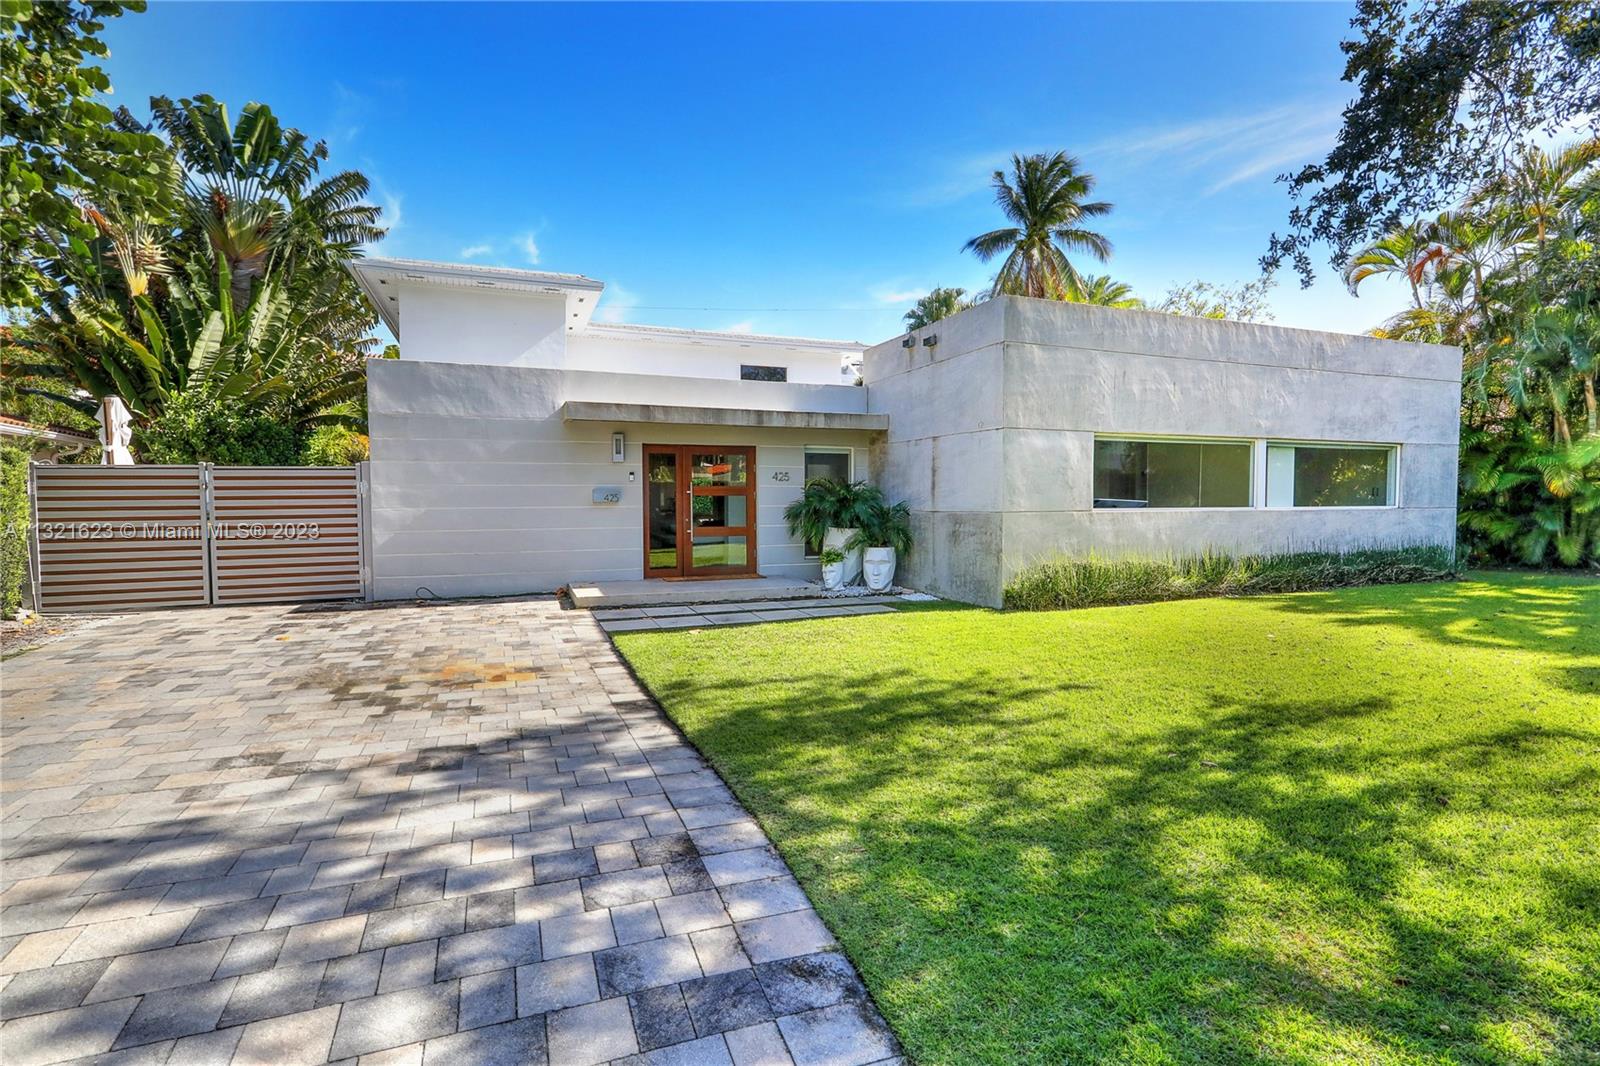 Beautifully redesigned modern pool home in the heart of Key Biscayne located on a quiet street within walking distance to Village Green Park and Key Biscayne Elementary School. Home features a bright open floor plan with 5 bedrooms 4 baths, a luxurious kitchen with quartz counter tops, wood cabinets and top-of-the-line appliances, large living room and dining area overlooking the outdoor living space that highlights the best of Miami’s lifestyle with its impressive pool, electric roof pergola and outside summer kitchen!  Additional features include impact windows and doors, wood like tiles throughout, new air conditioners, water heaters, electric panel, water meter and driveway.